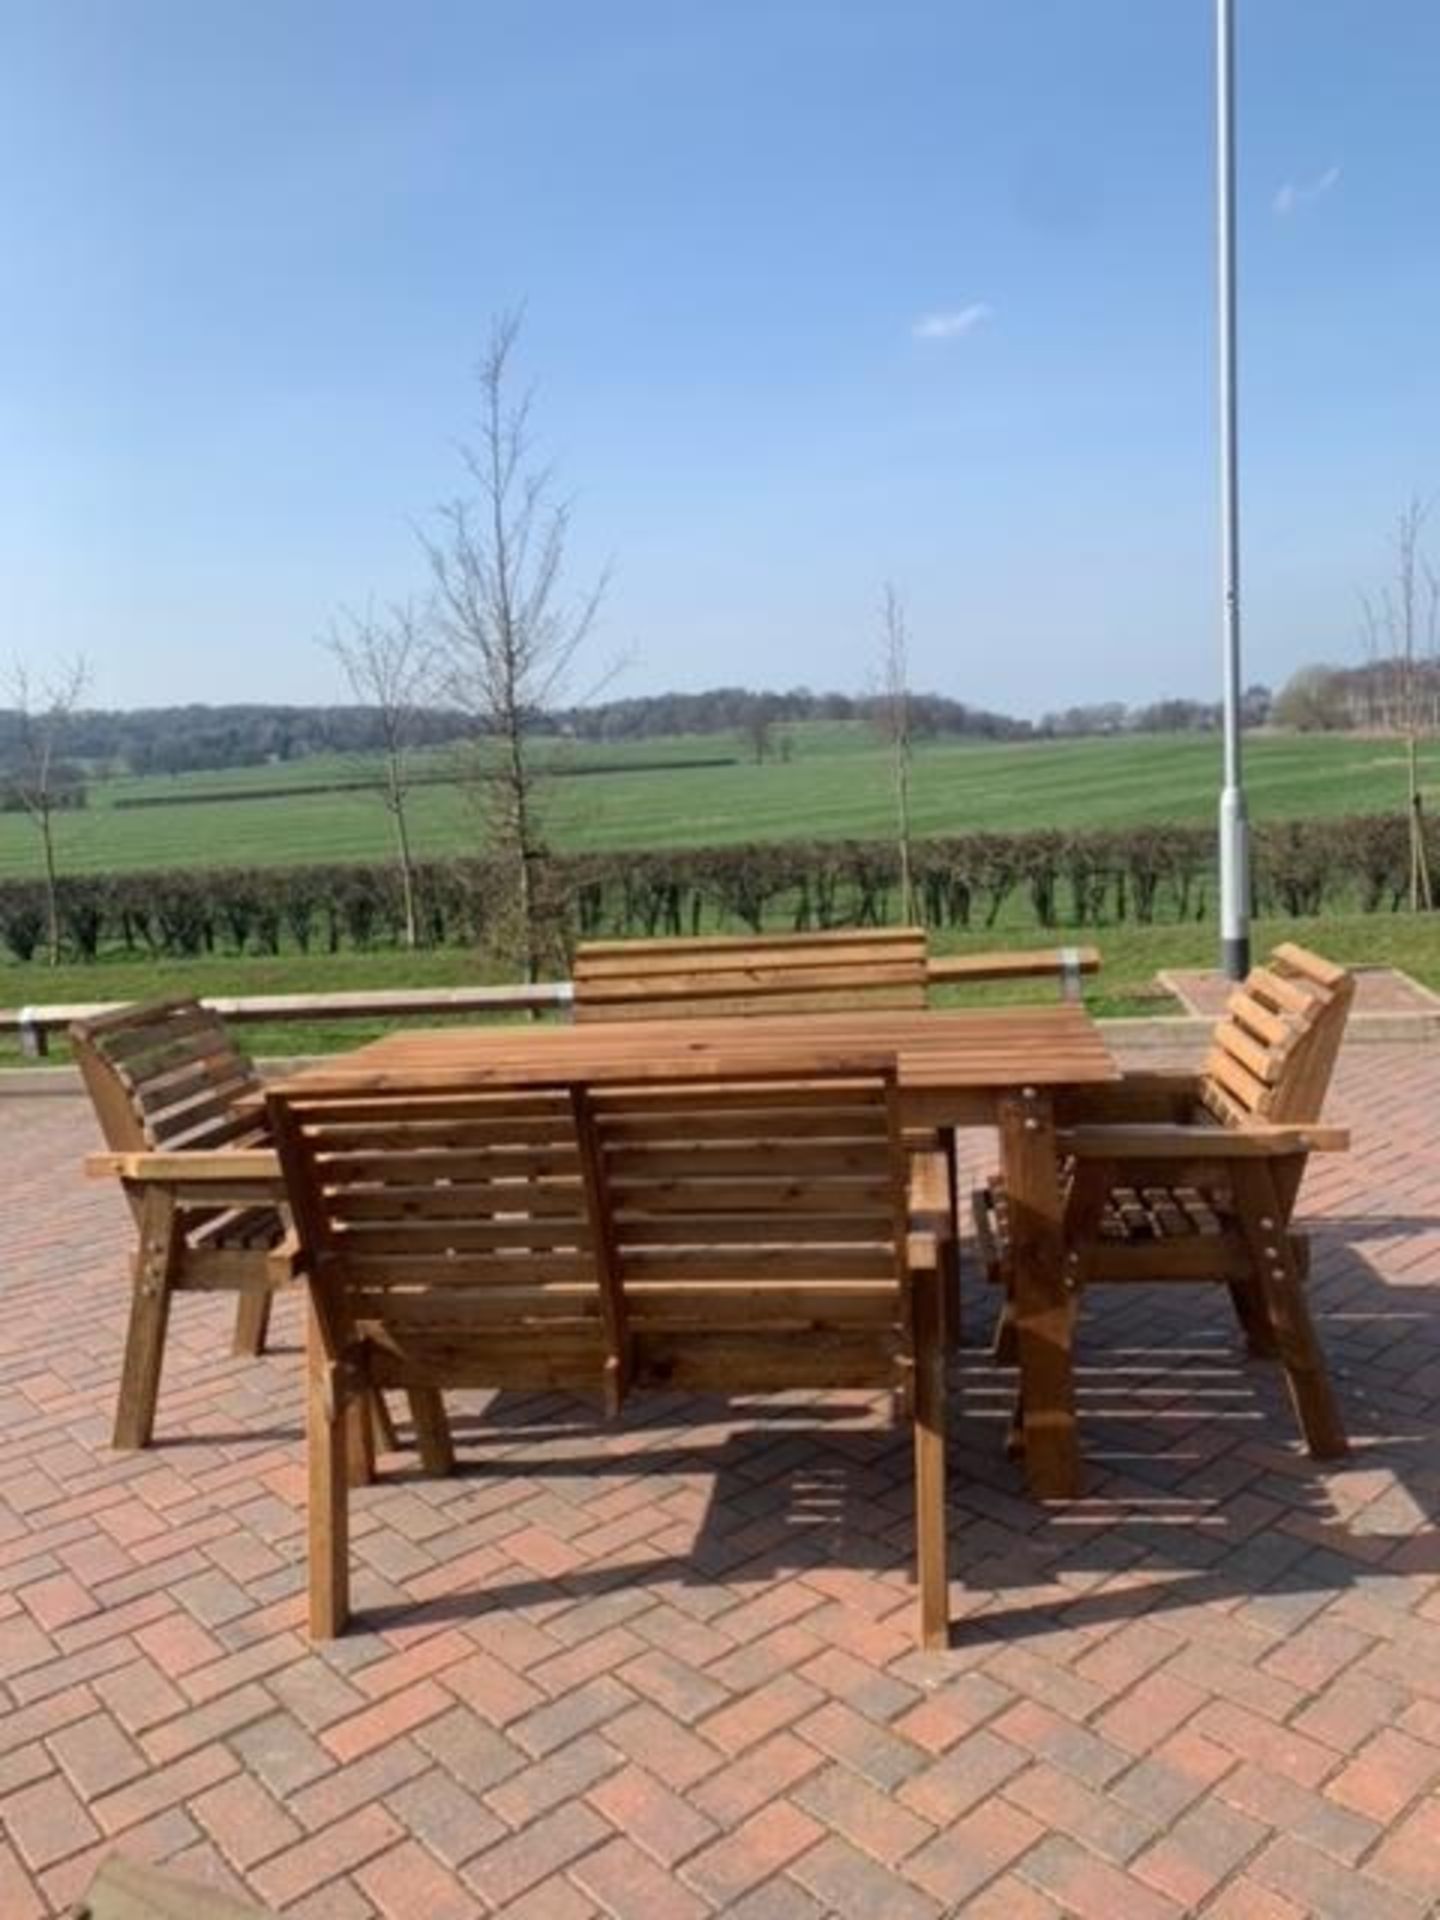 BRAND NEW QUALITY 6 seater handcrafted Garden Furniture set,Large table, 2 benches, 2 chairs*NO VAT* - Image 6 of 7